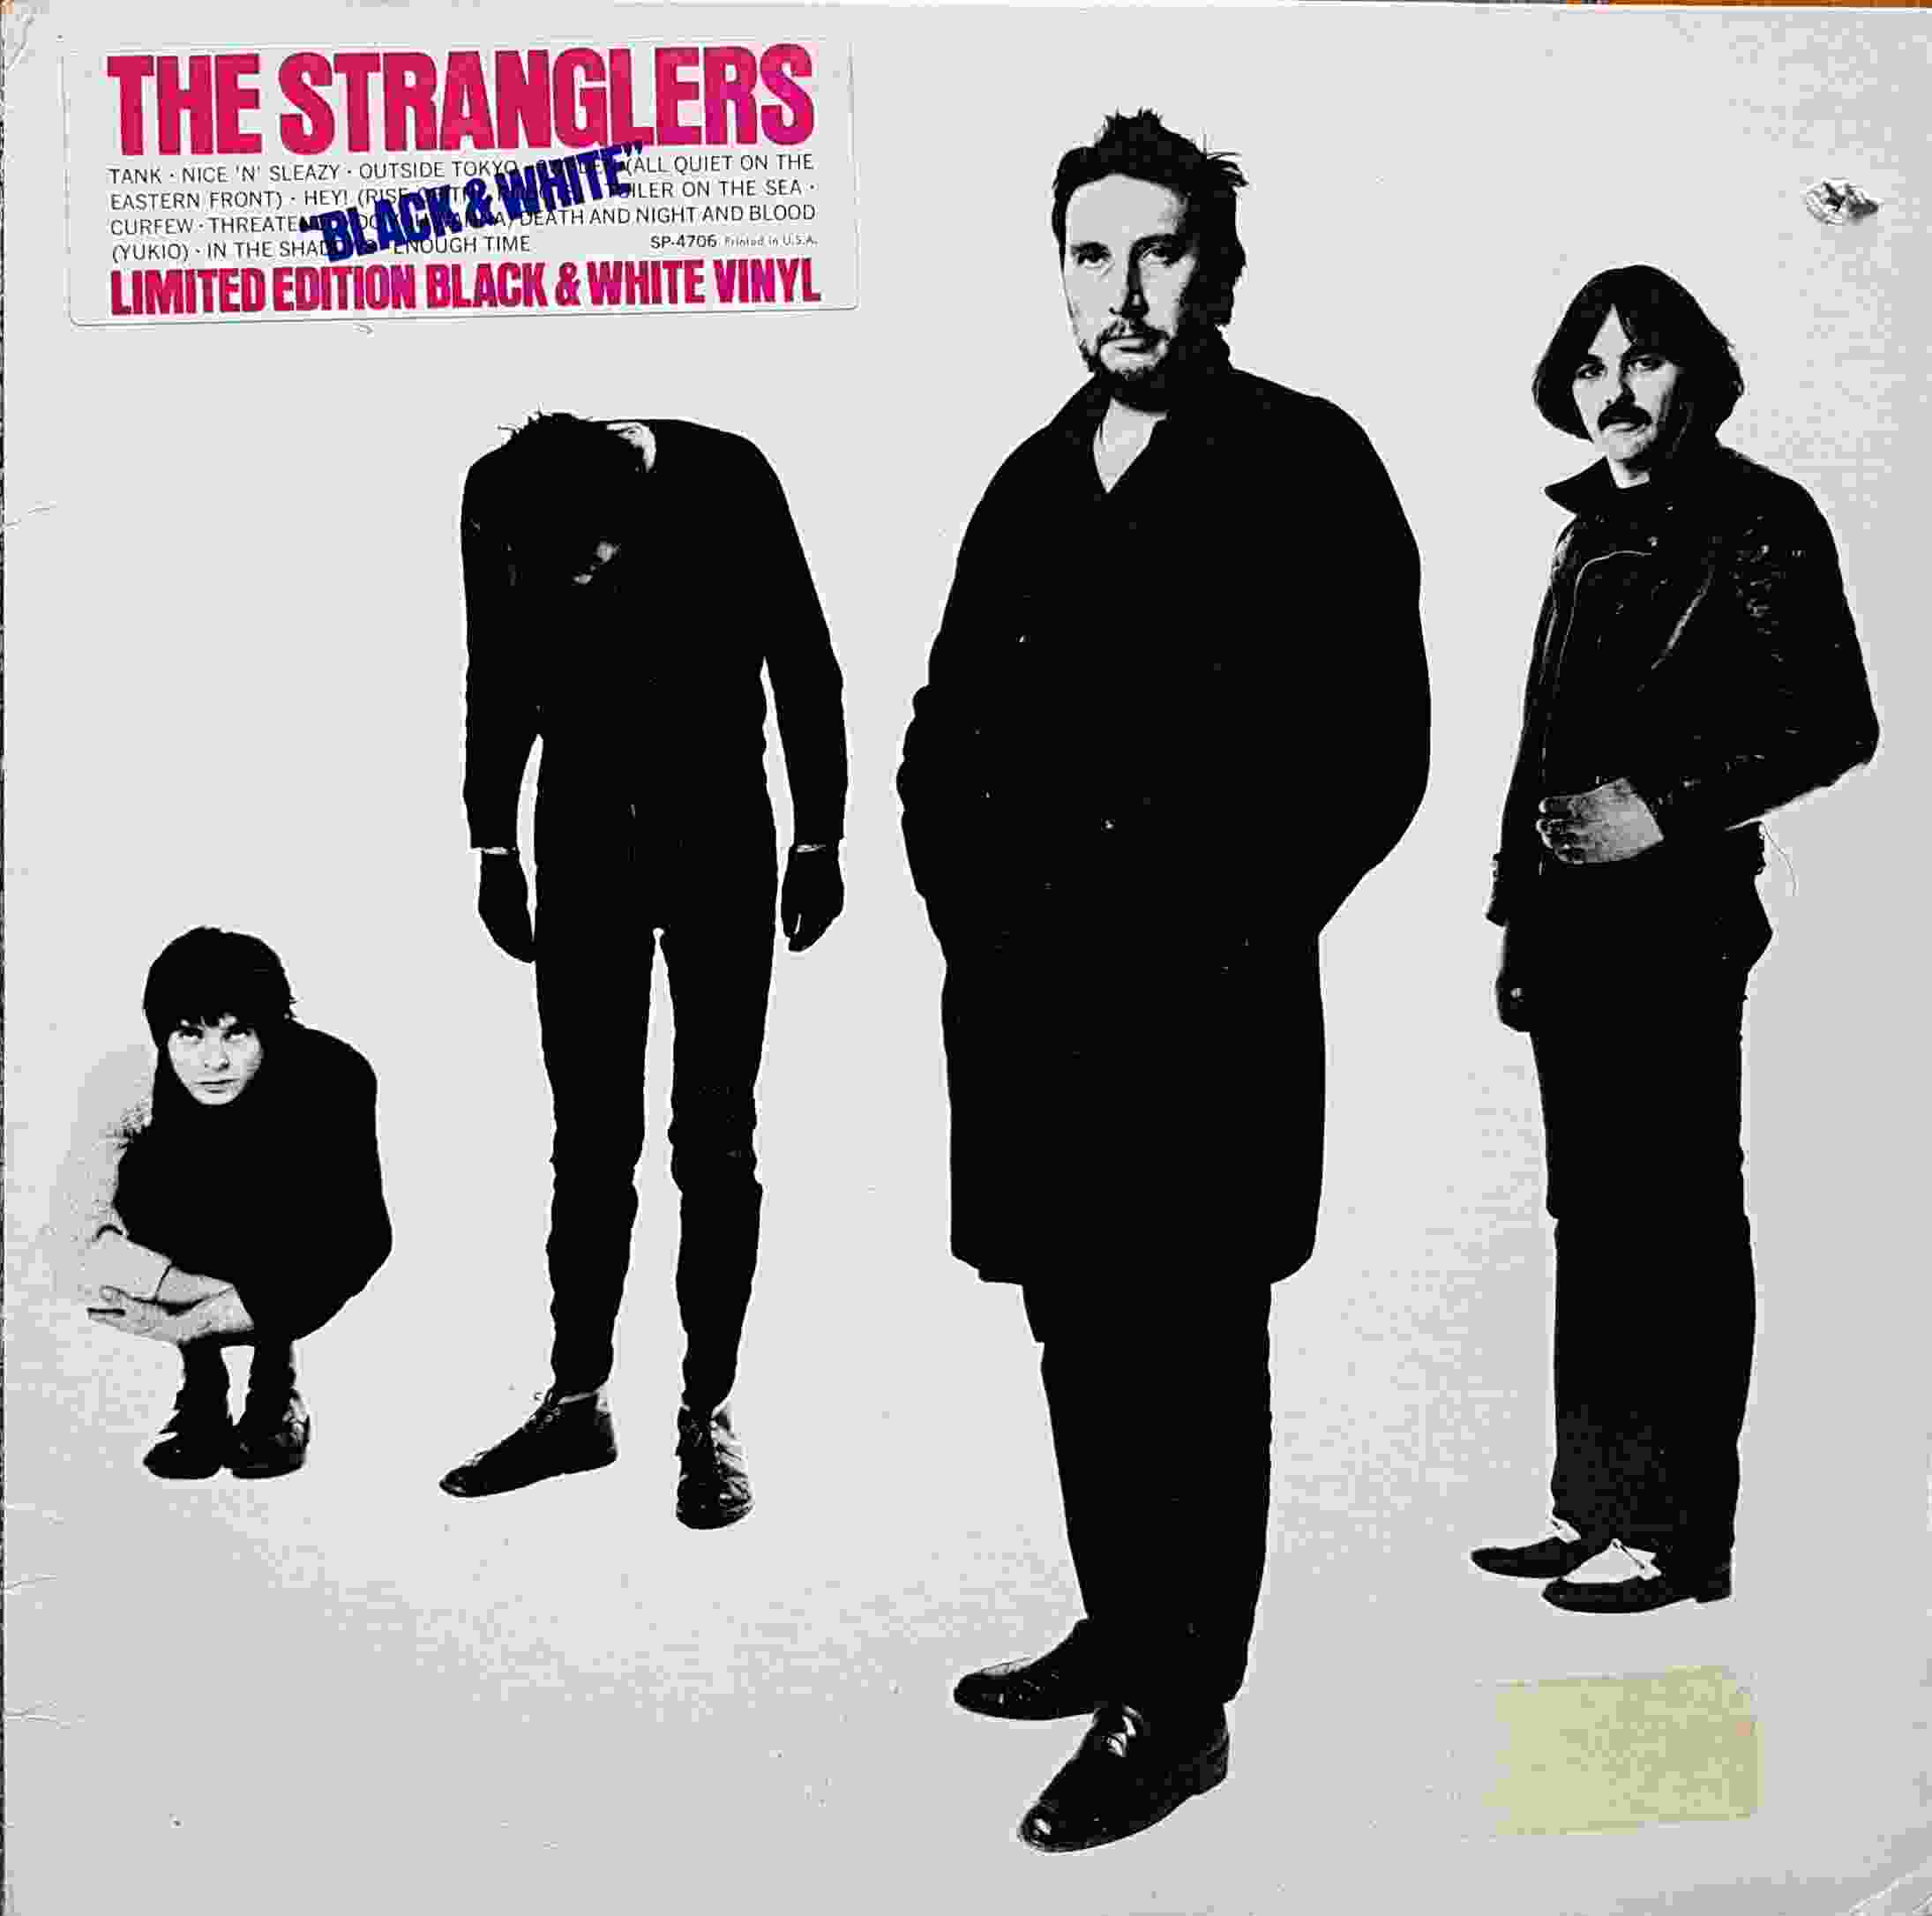 Picture of SP 4706 P Black and white - US import (Coloured vinyl, promotional record) by artist The Stranglers  from The Stranglers albums